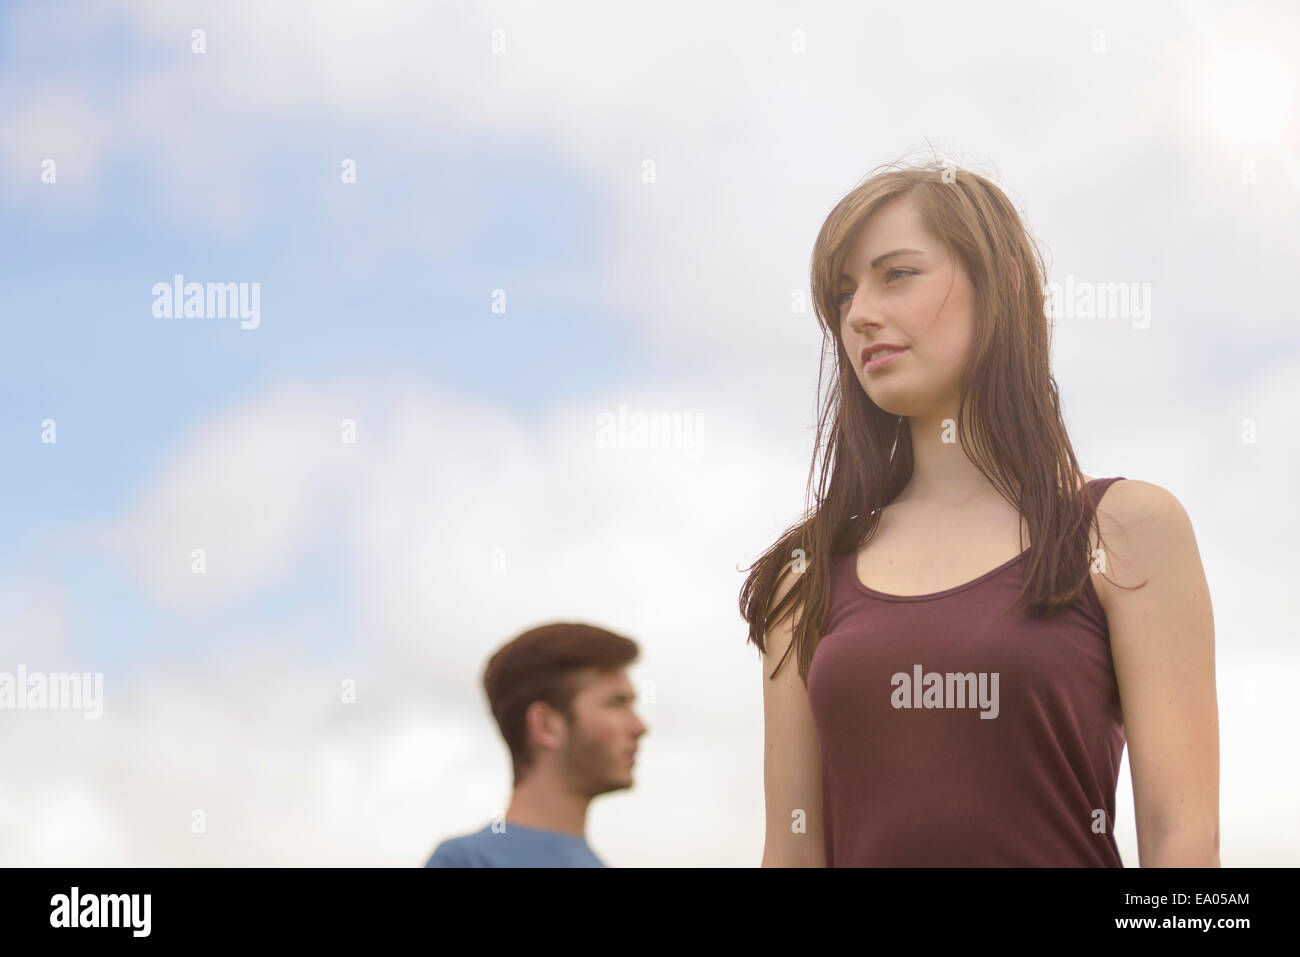 Young couple standing apart and looking away under bright blue sky Stock Photo